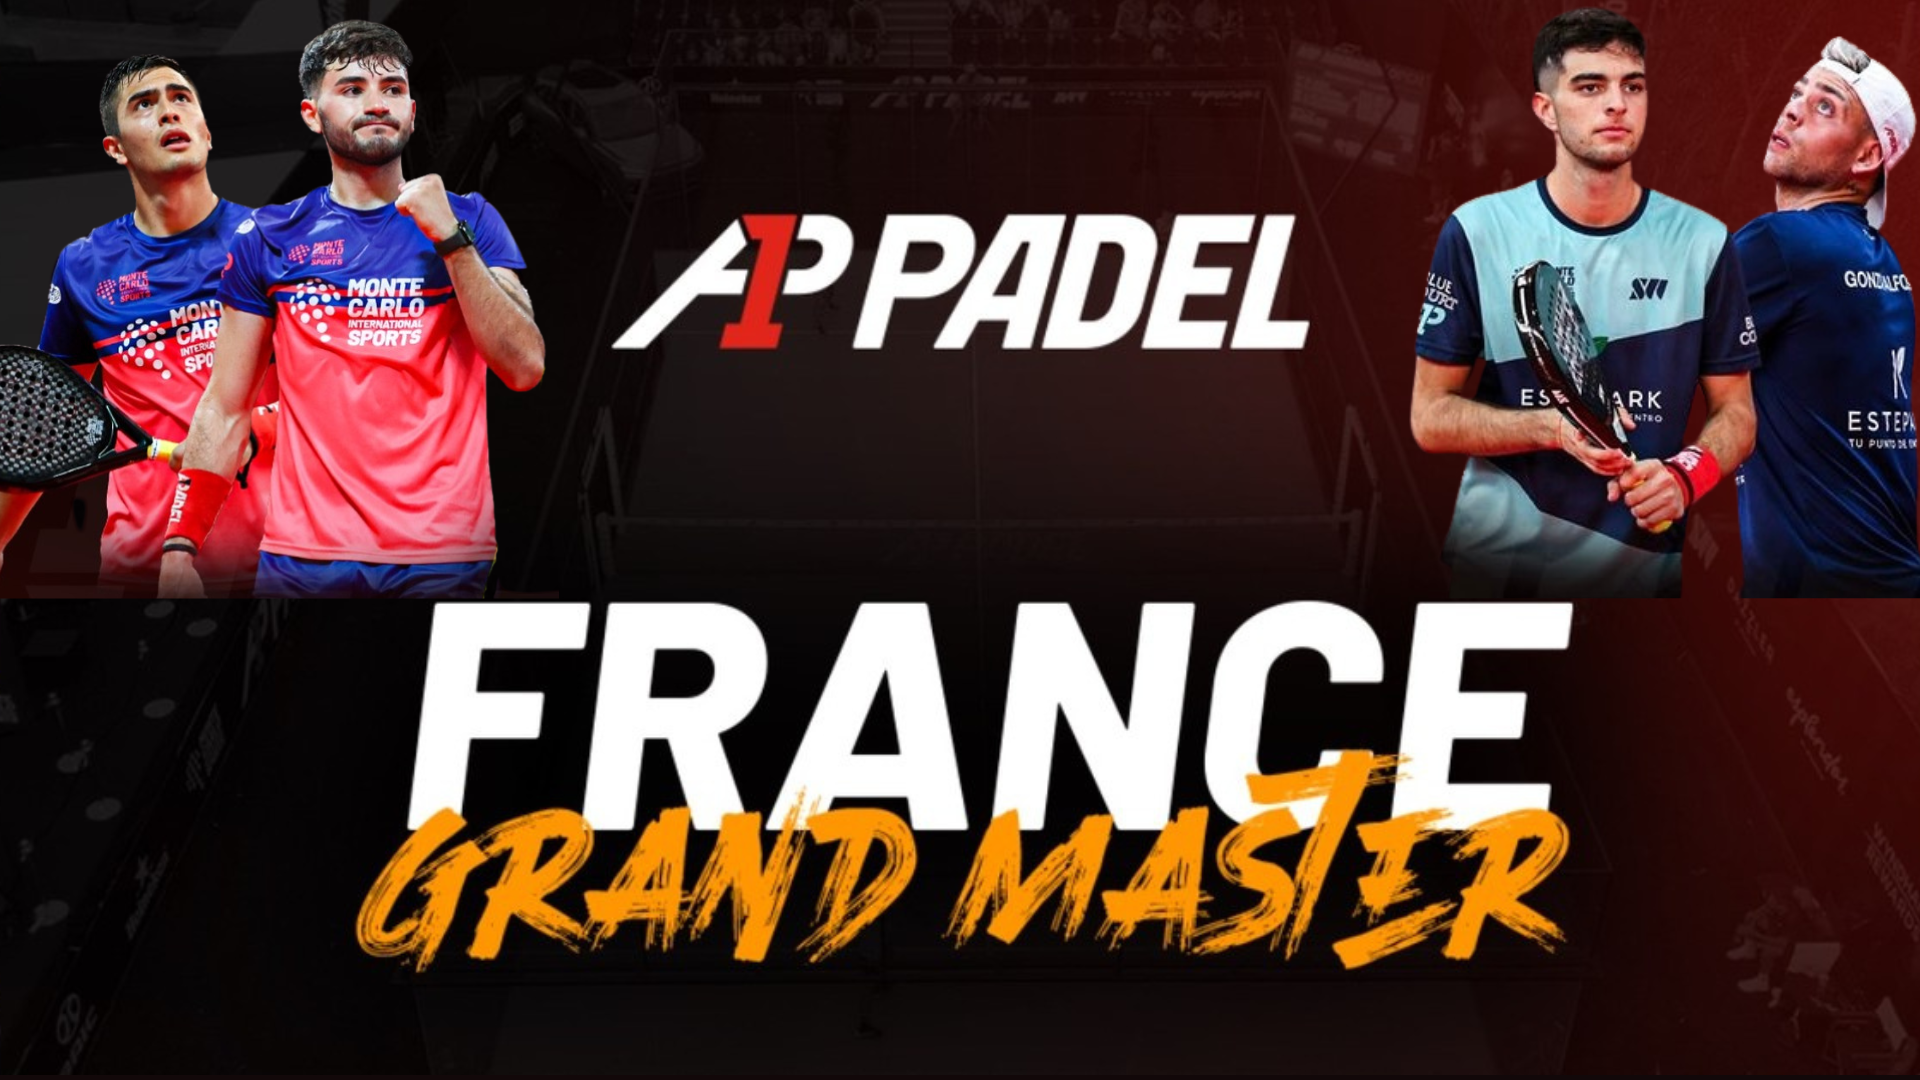 A1 Padel France Grand Master – De Pascual/Alfonso in the final against Dal Bianco/Arce